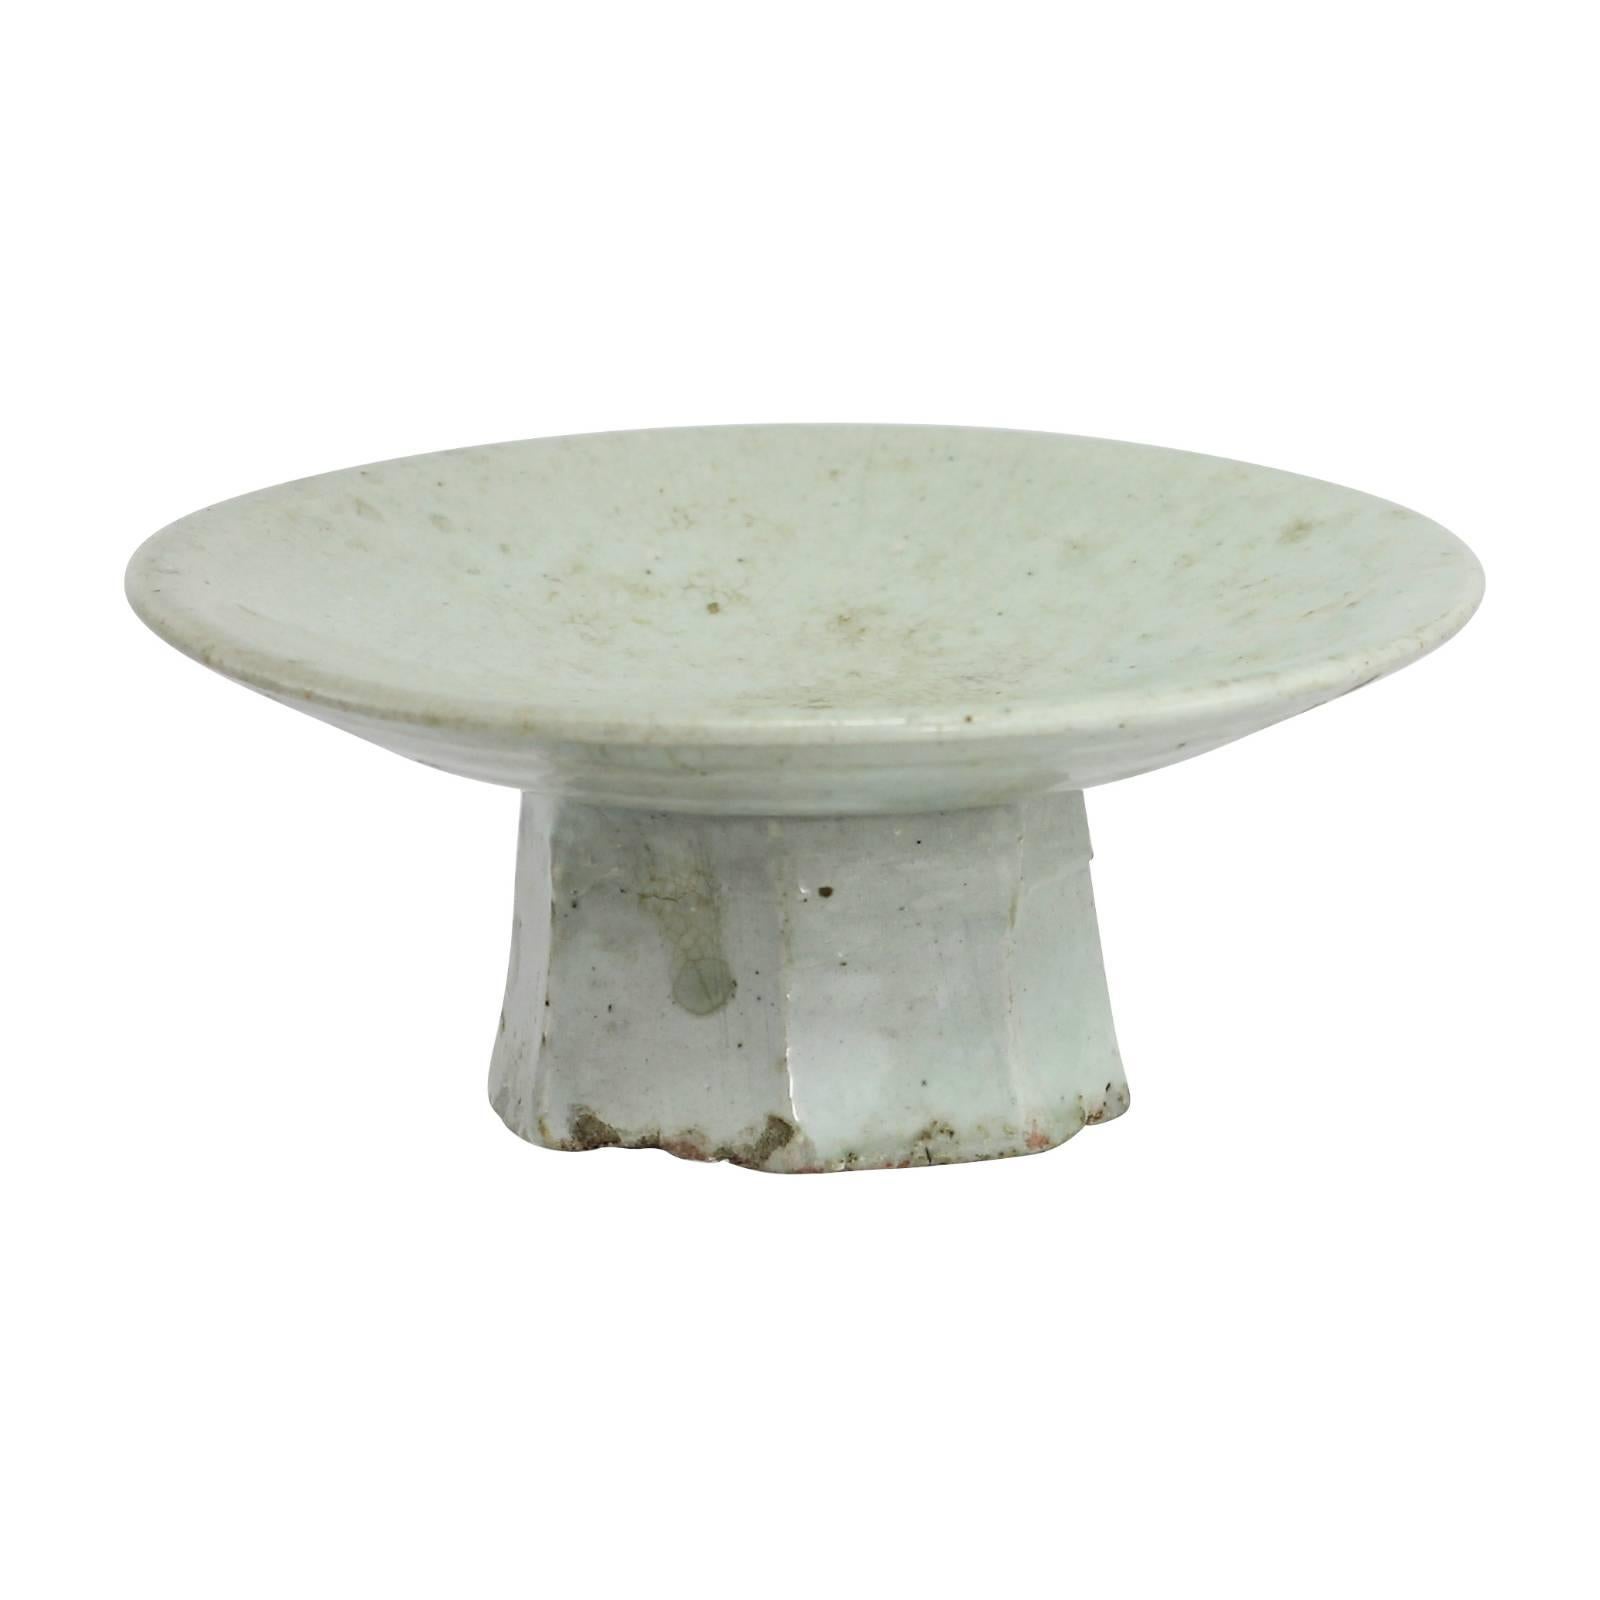 A Korean Joseon Dynasty octagonal footed dish with an off-white glaze. It is believed that this piece would have been produced for domestic use.